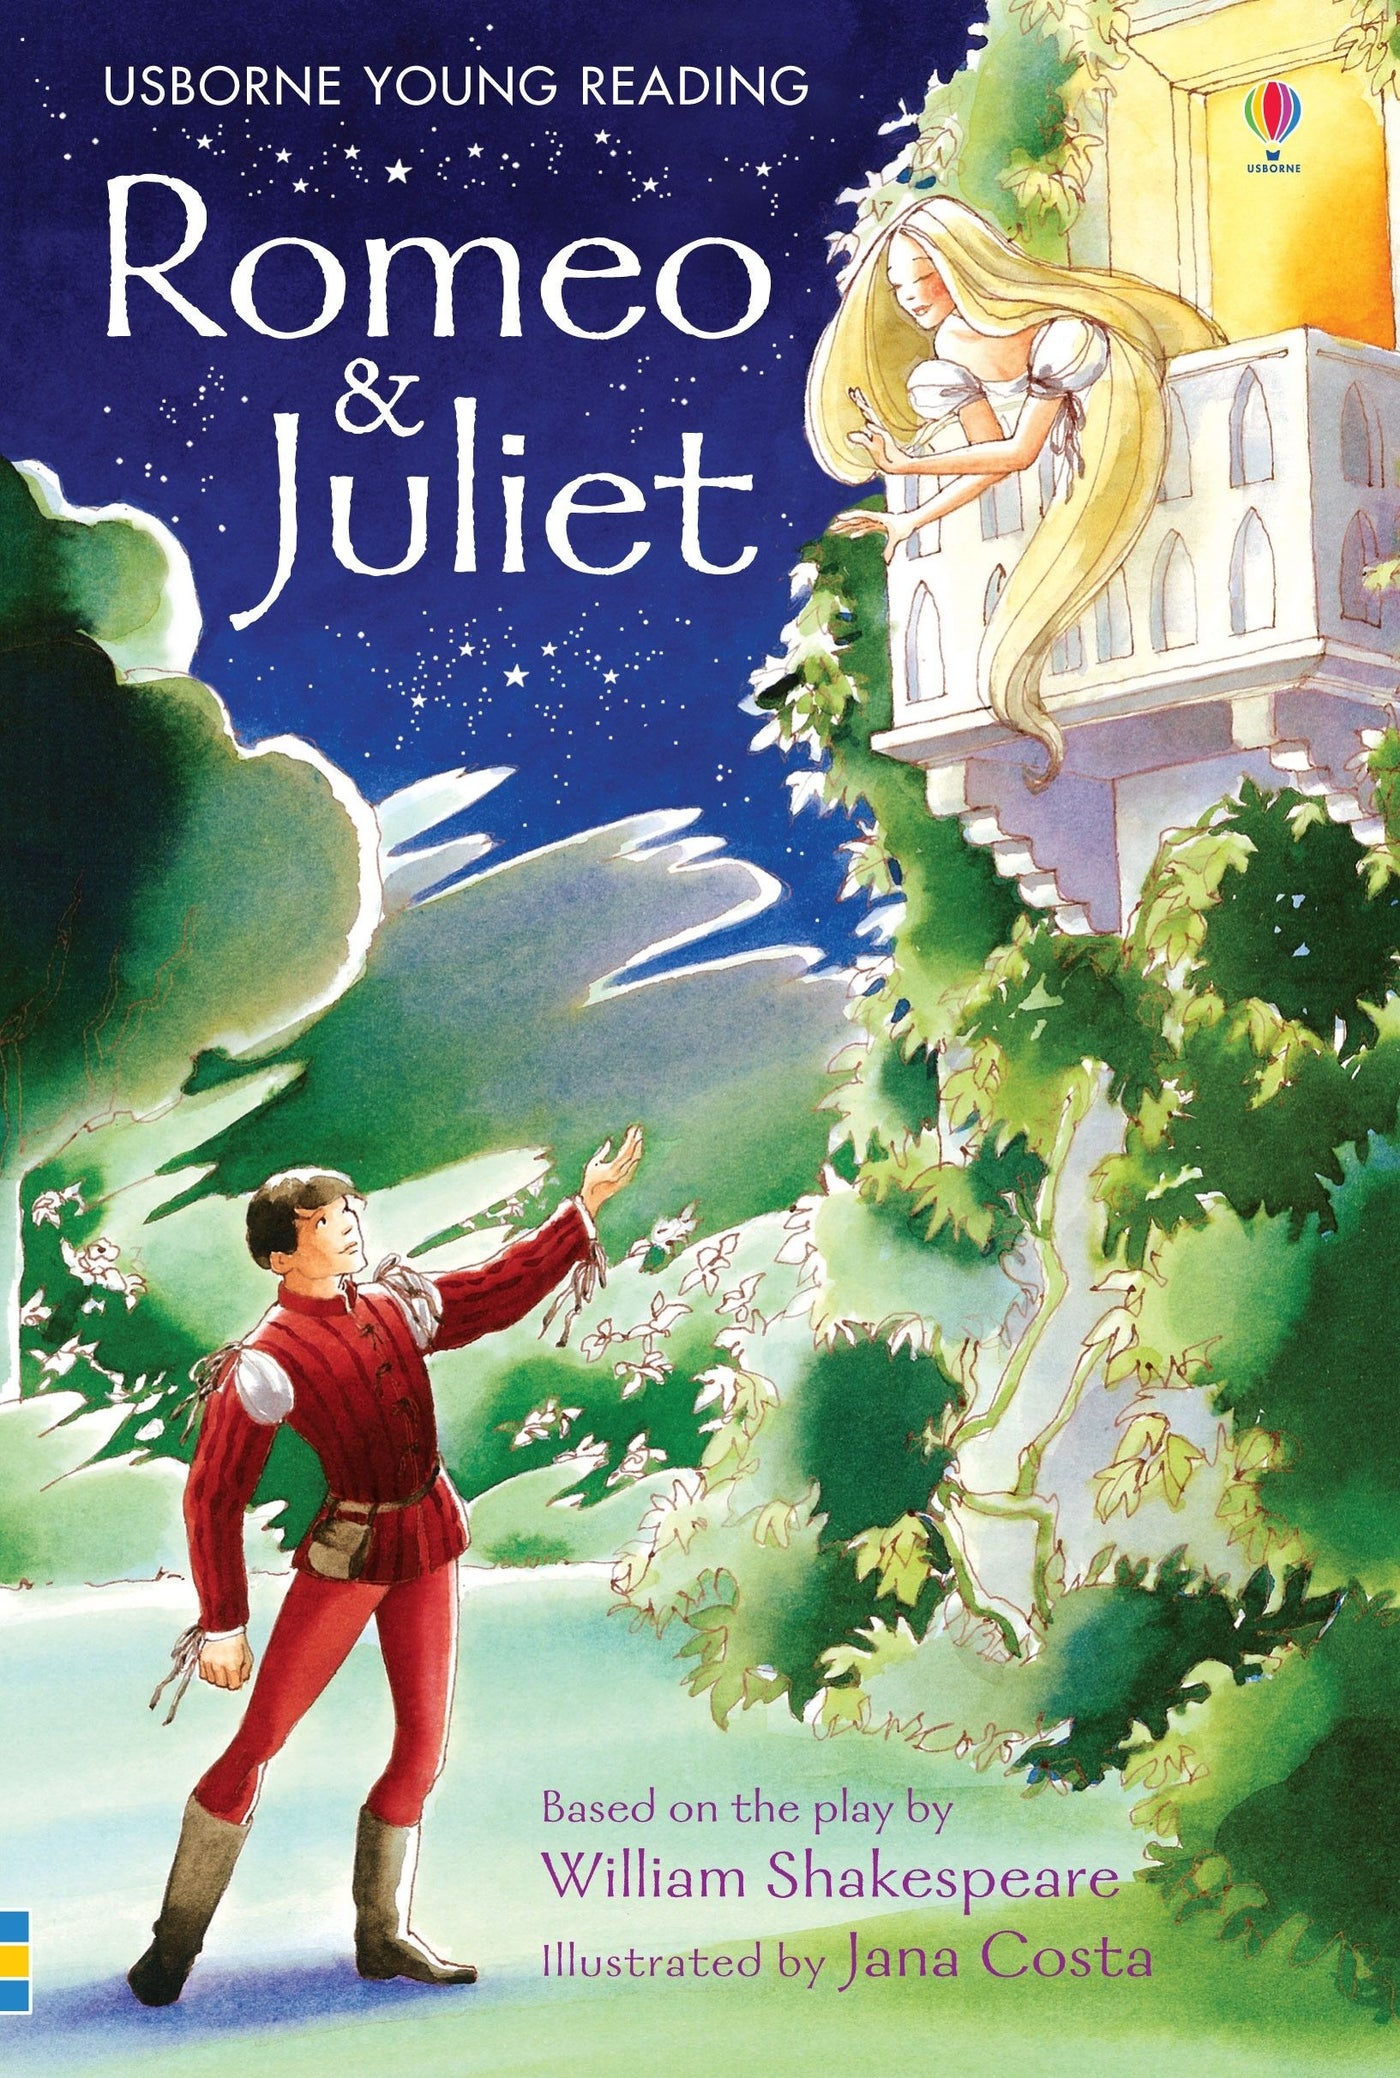 Romeo and Juliet: Young Reading Series 2 Paperback | Usborne Books